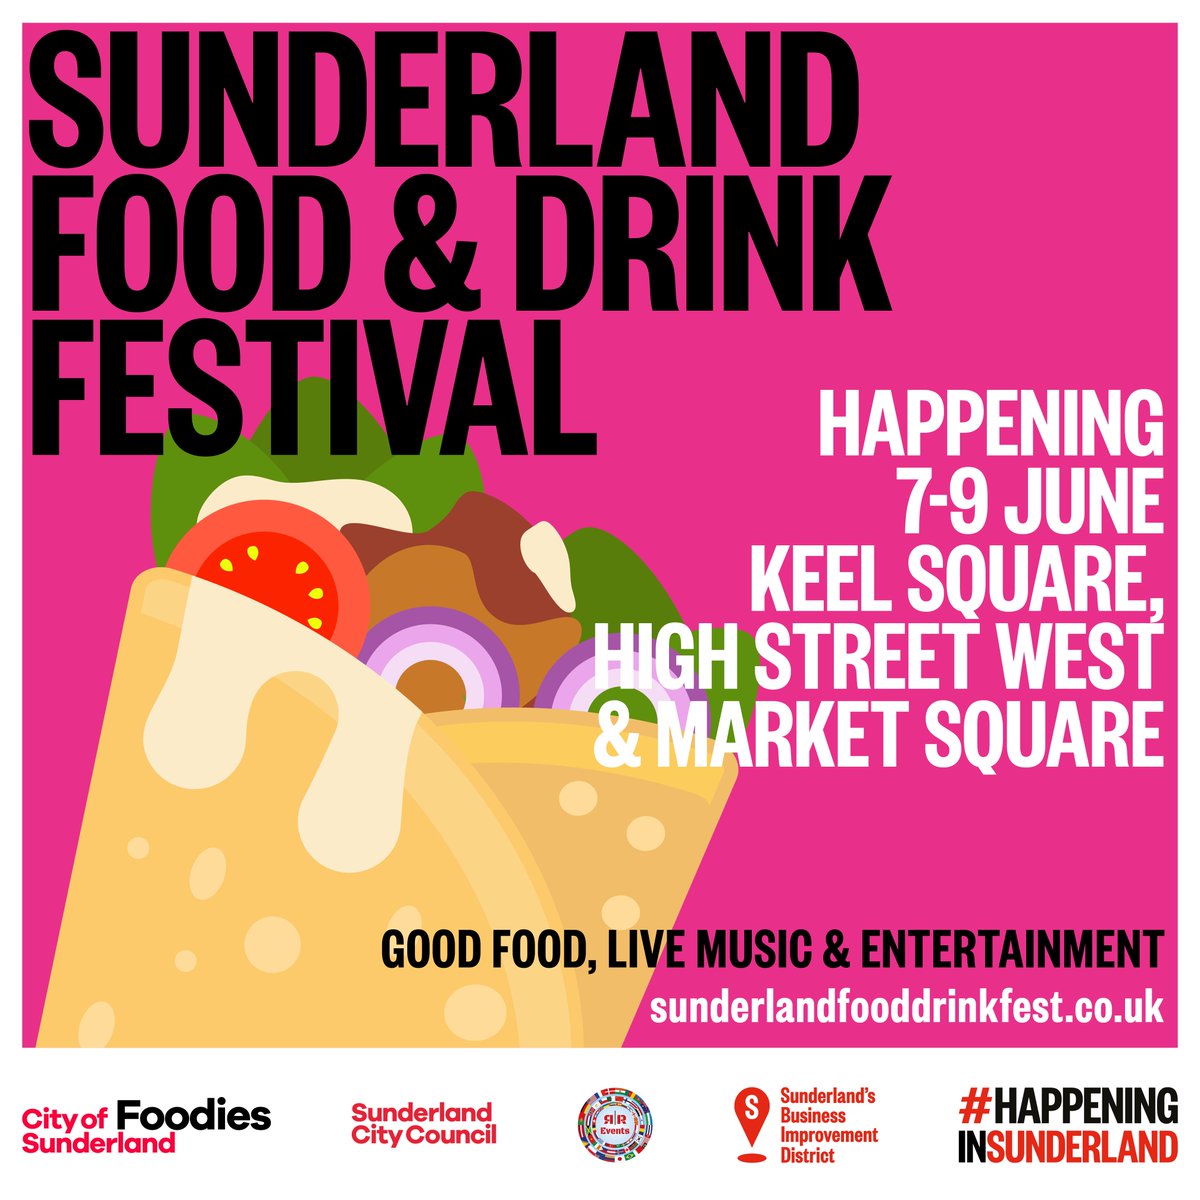 The countdown is ON 🥙 🥗 🍔 Sunderland Food and Drink Festival is #HappeningInSunderland City Centre on 7, 8 and 9 June! Kickstart your summer with some food and some fun in Sunderland... Find out more 👉 orlo.uk/J5RNX